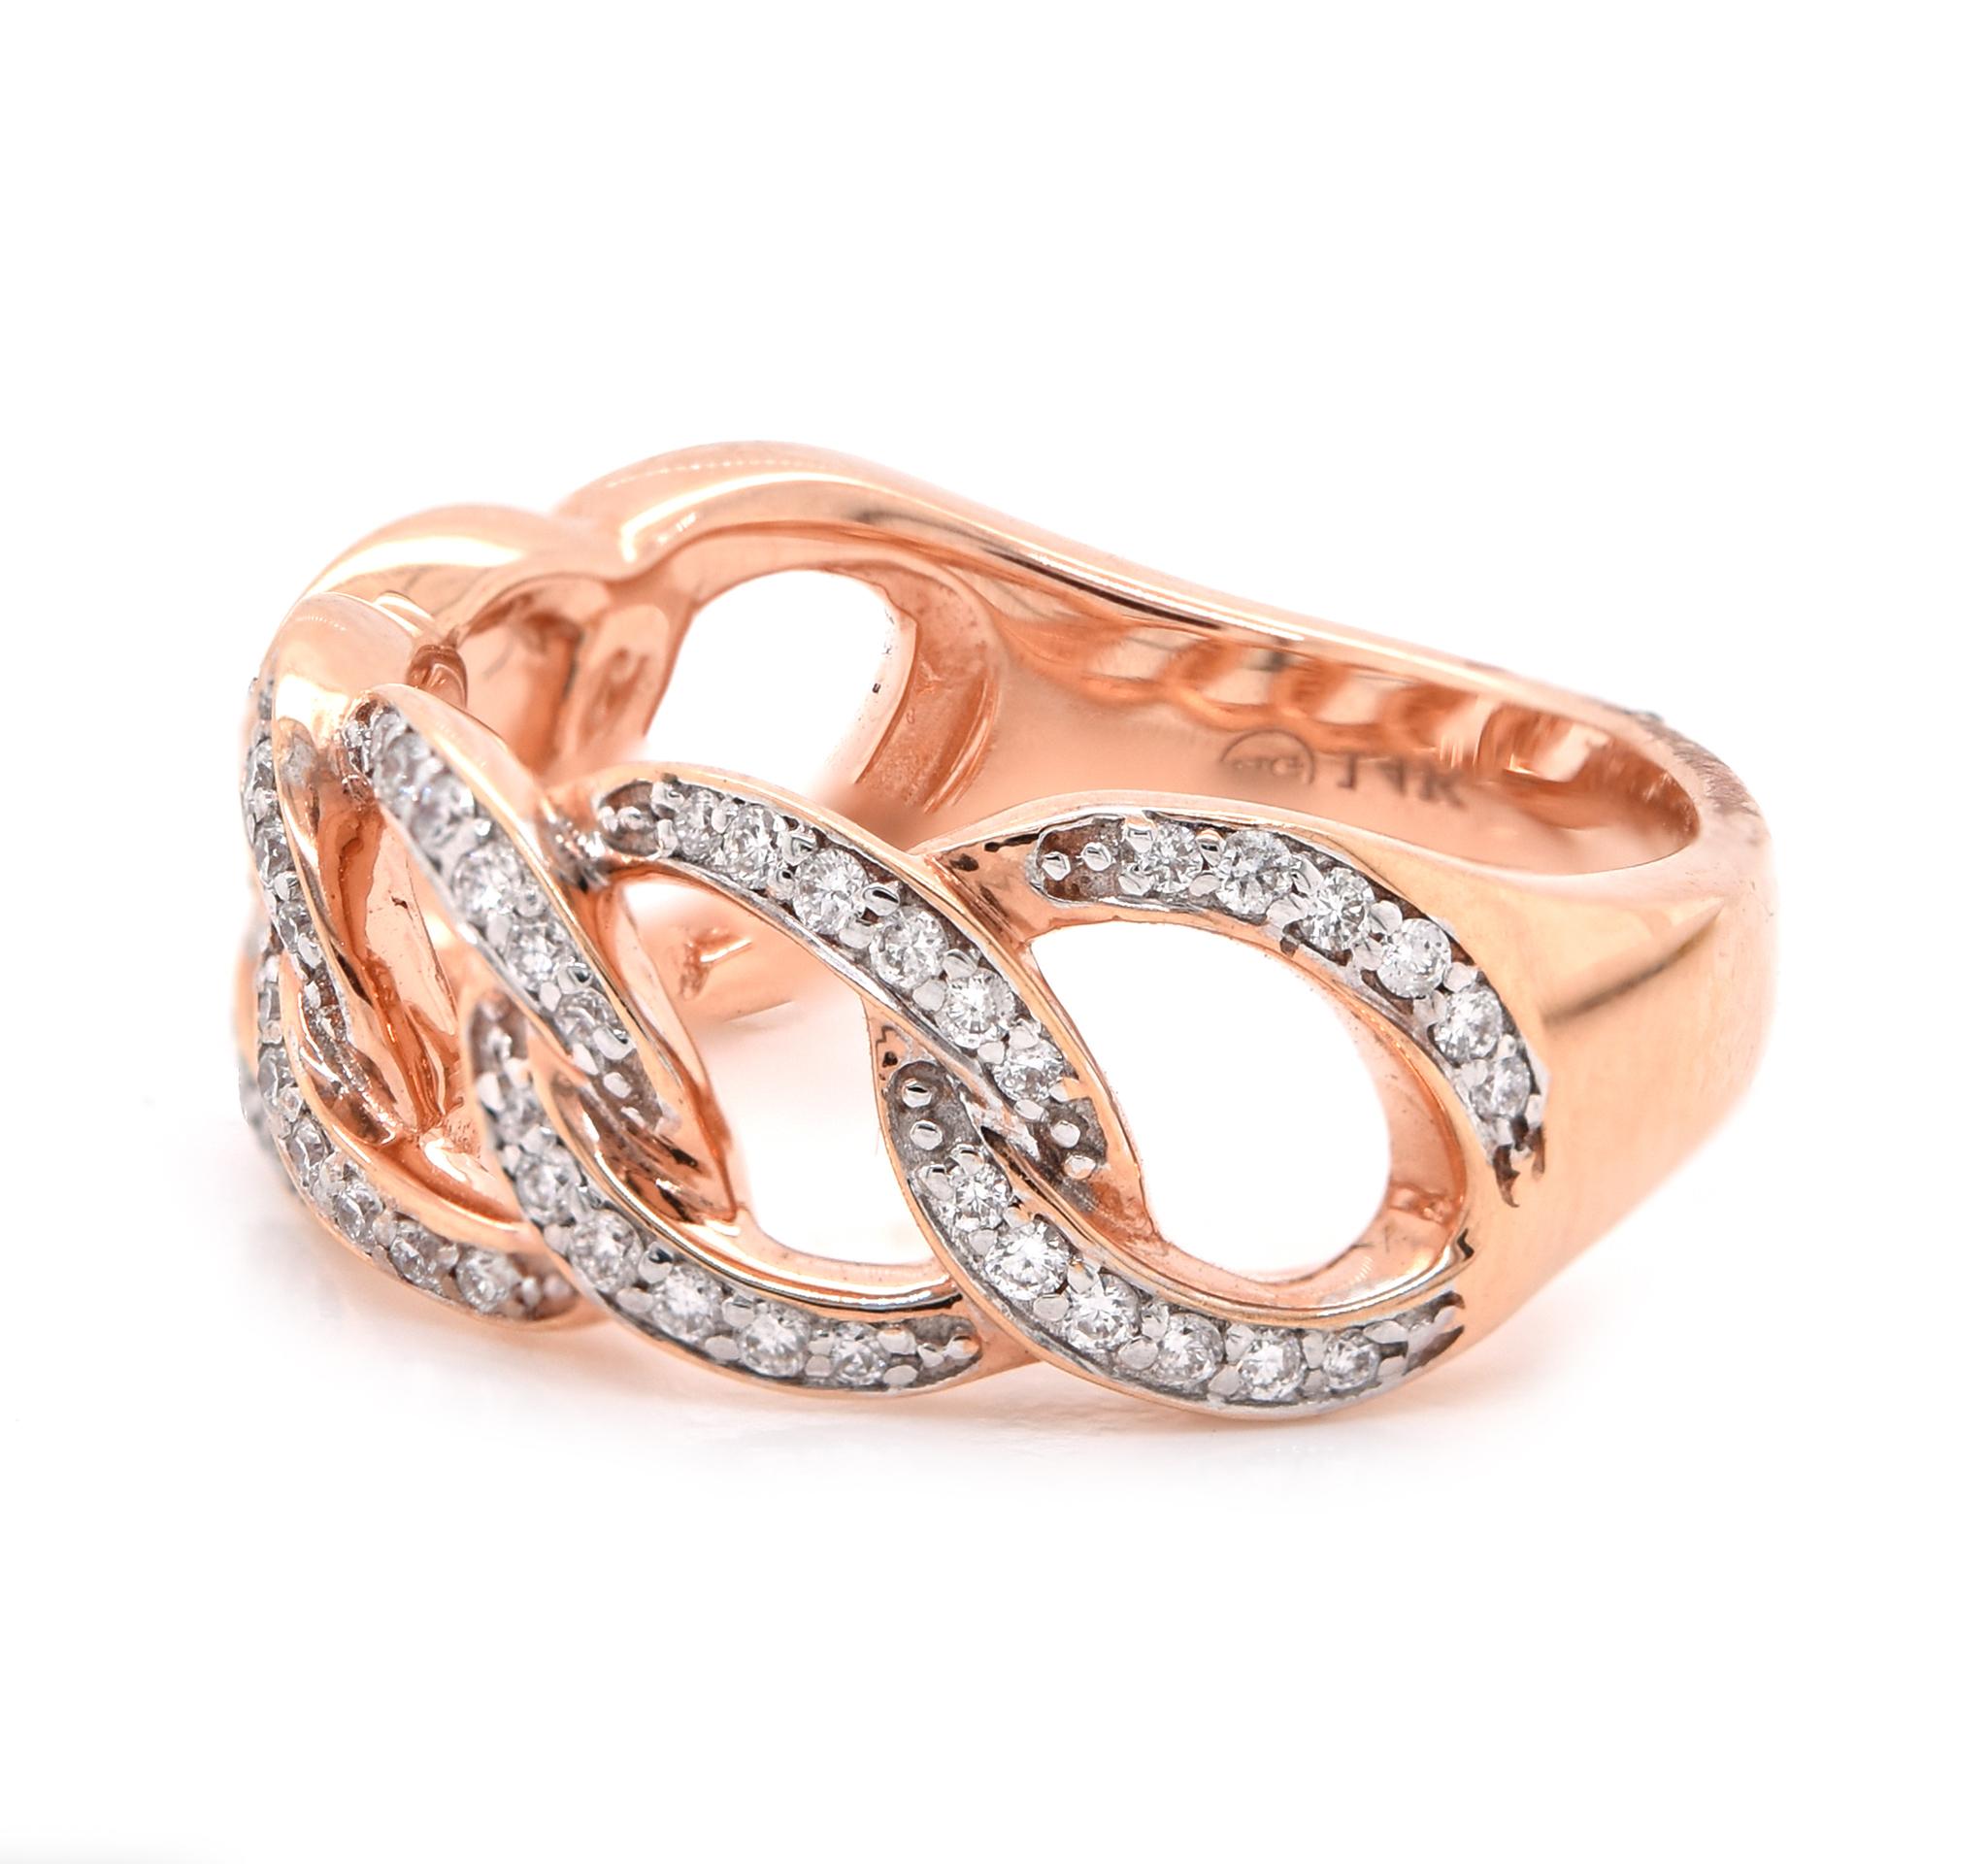 Designer: custom
Material: 14K rose gold
Diamonds: 72 round cut = 1.00cttw
Color: G
Clarity: VS2
Size: 6.5 (please allow two additional shipping days for sizing requests)  
Dimensions: ring measures 8.14mm in width
Weight: 5.62 grams
